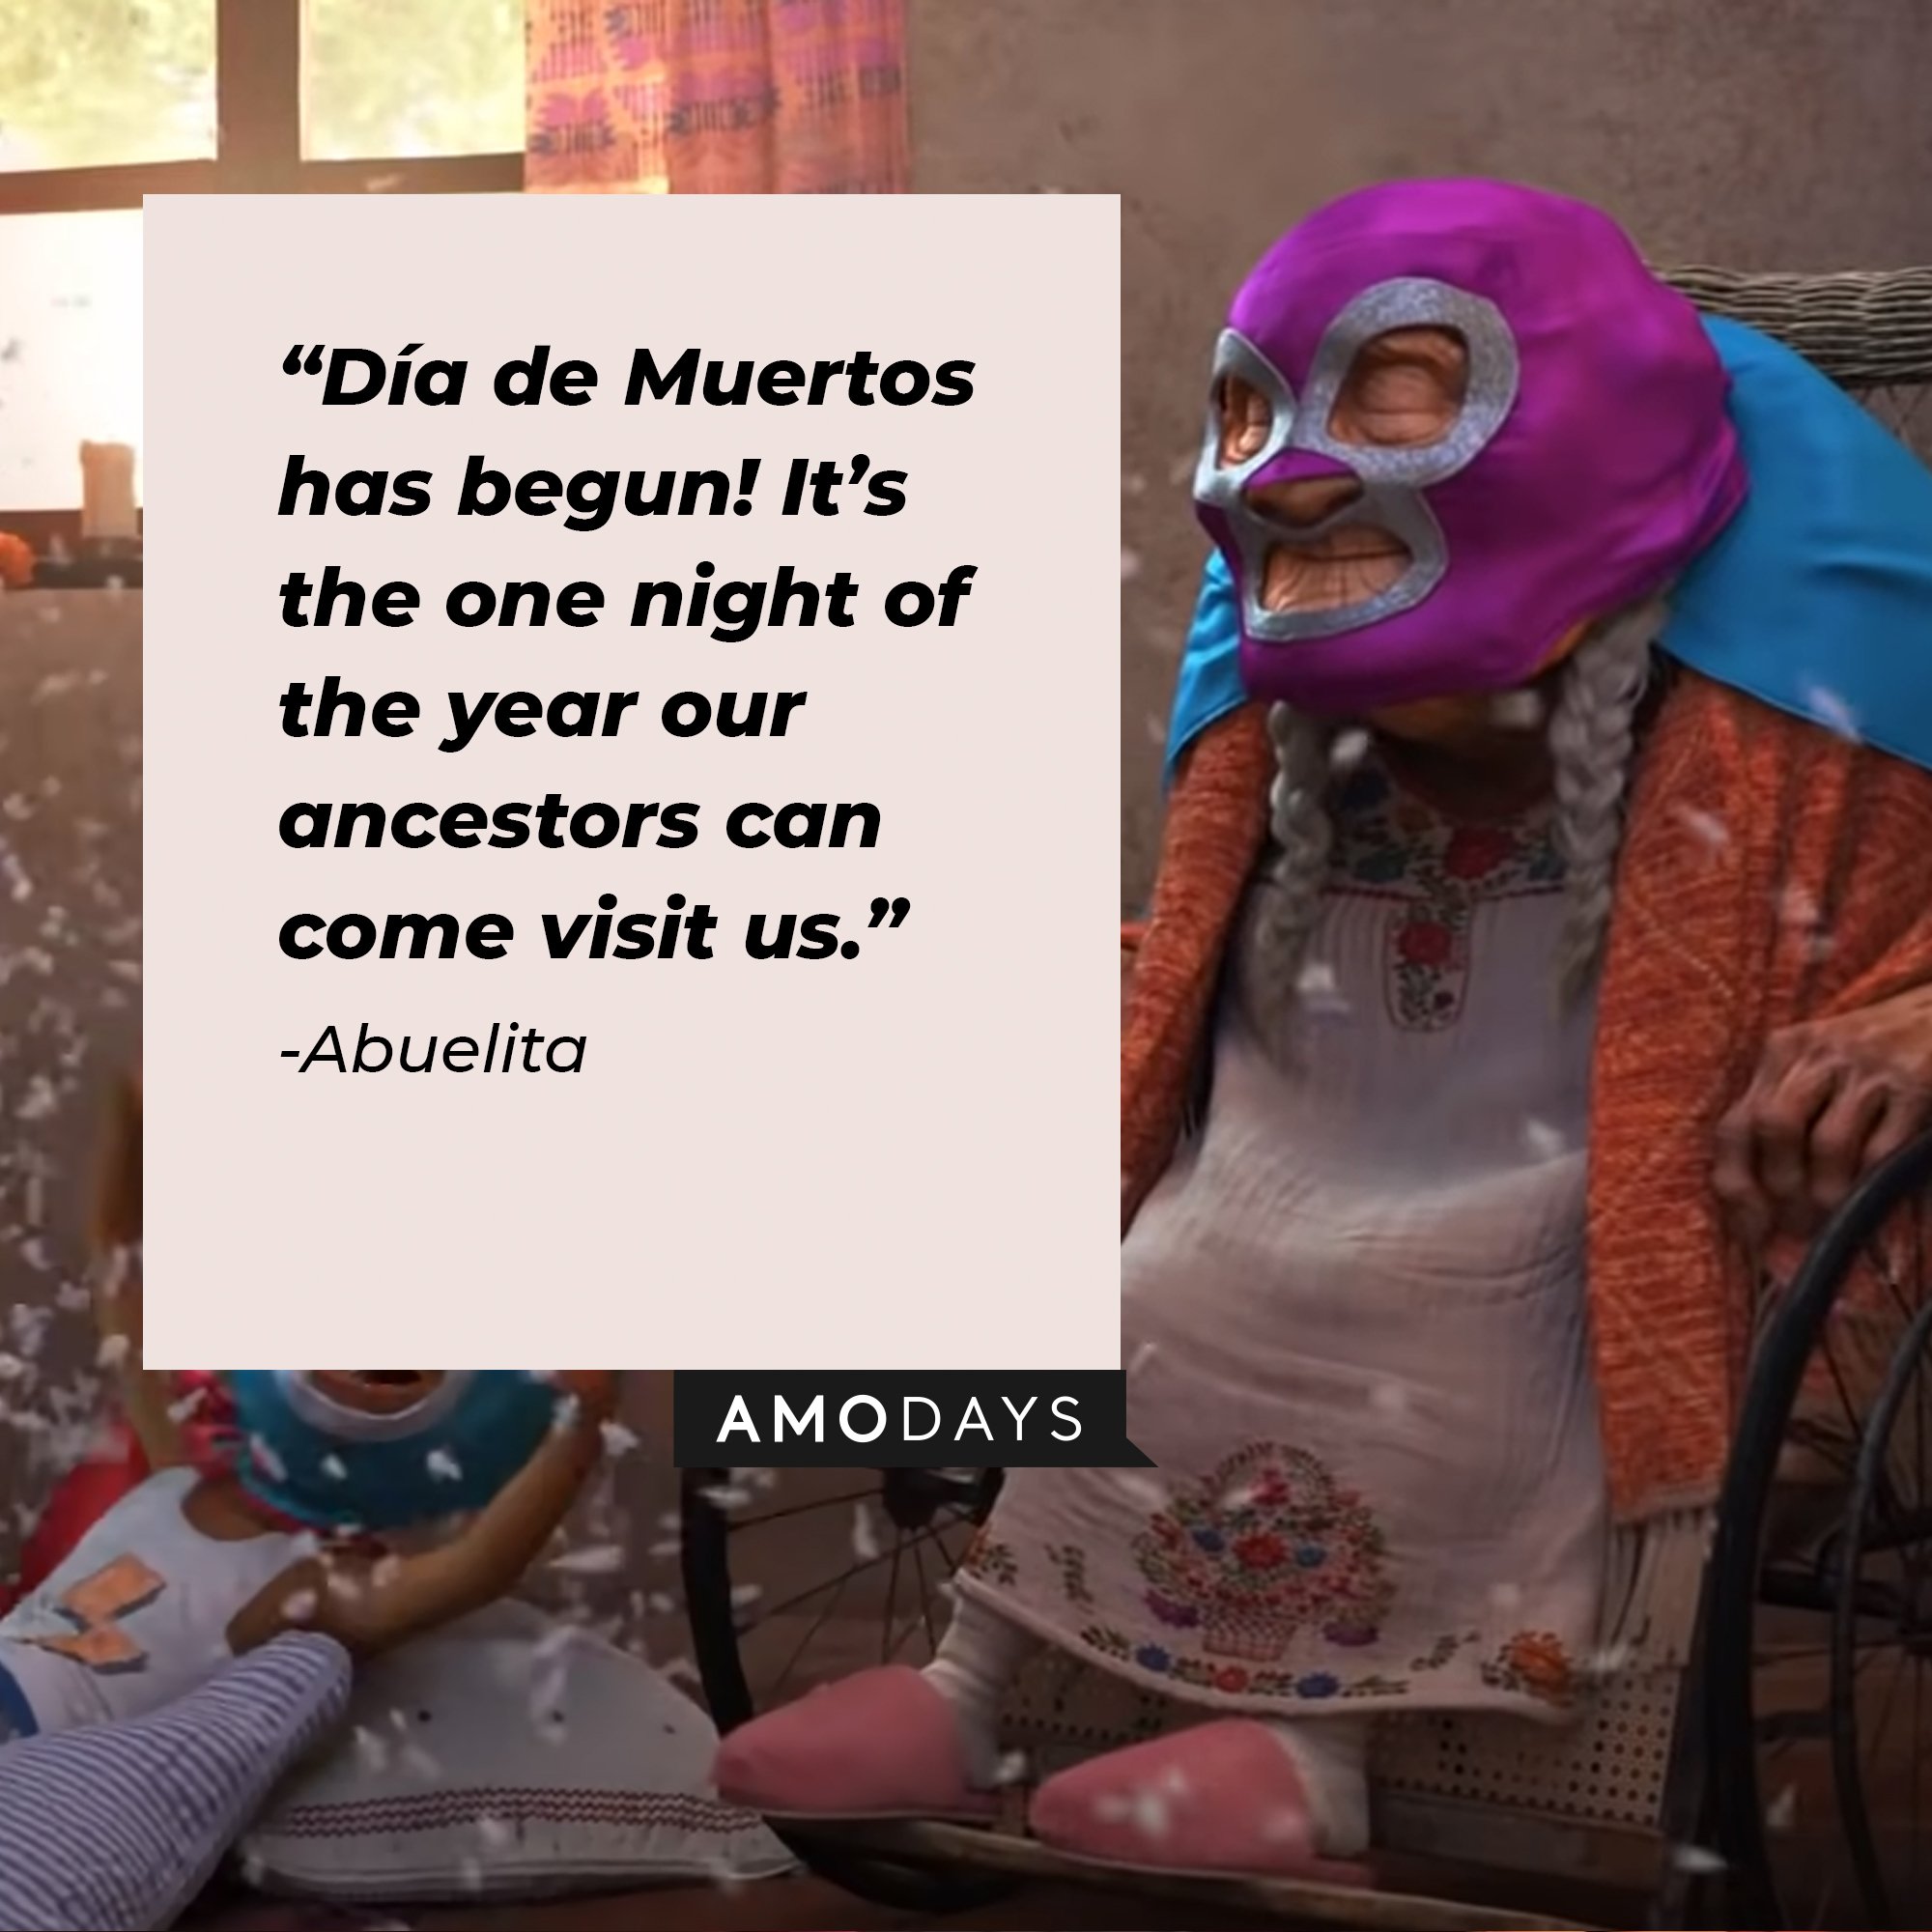 Abuelita's quote: “Día de Muertos has begun! It’s the one night of the year our ancestors can come visit us.” | Image: AmoDays